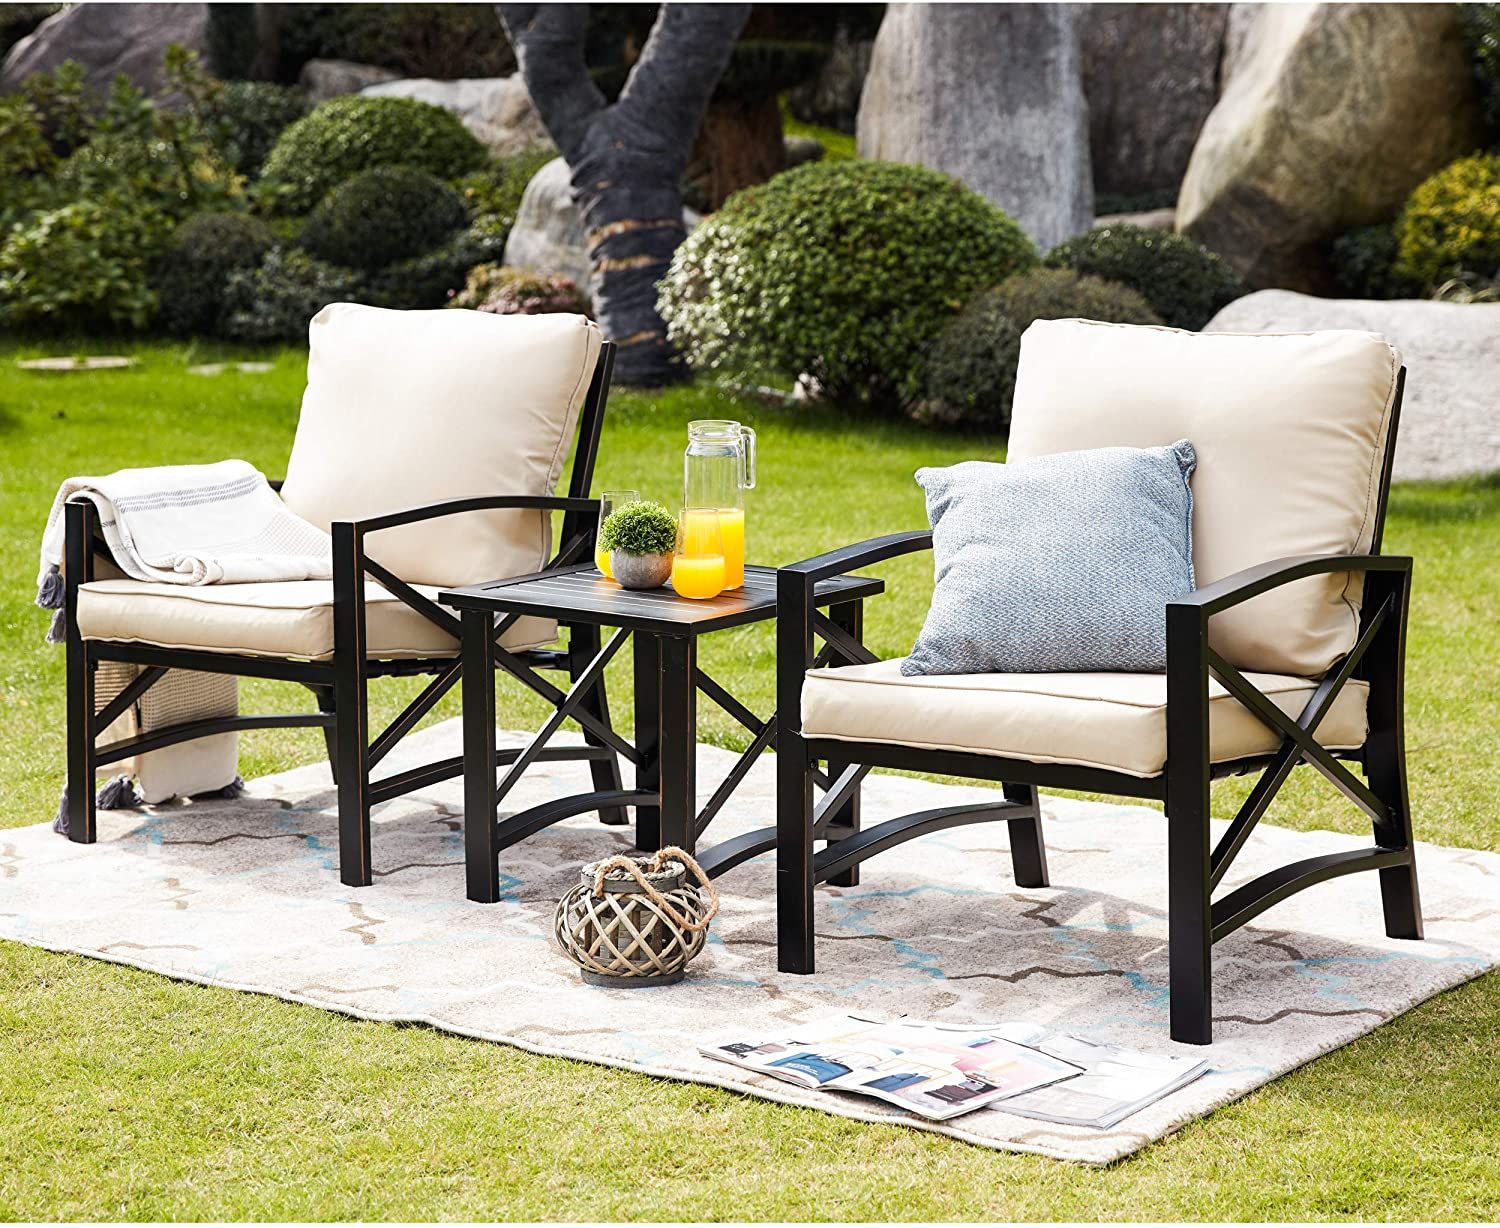 8 Best Patio Furniture Sets 2021 The Strategist - Good Wooden Patio Furniture